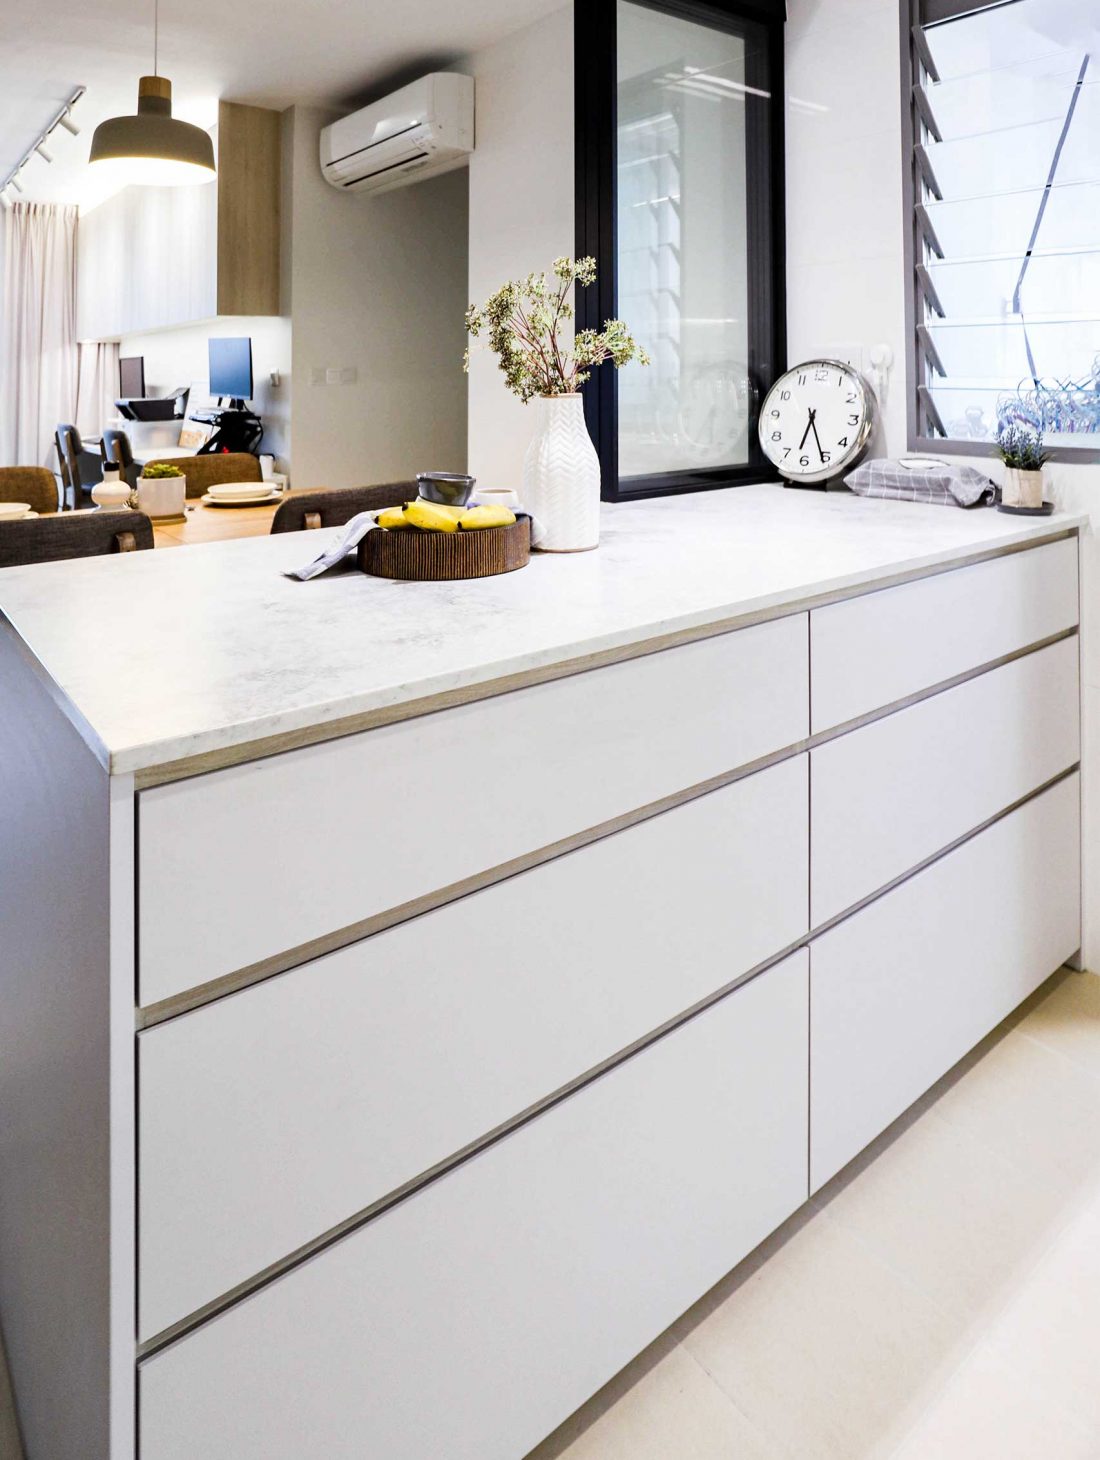 HDB storage for kitchen cabinet counter drawers Margaret drive